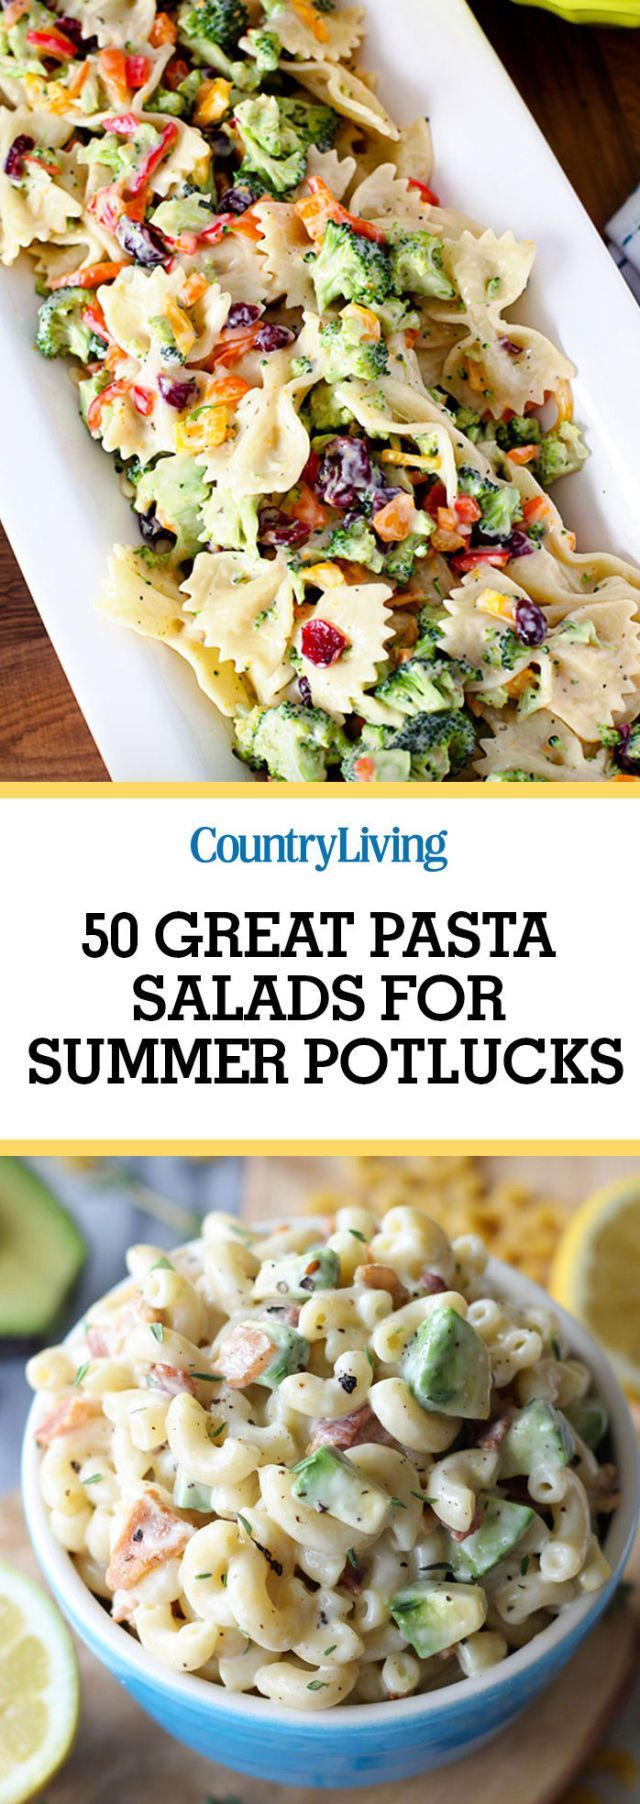 These summer pasta salad recipes will blow your cookout and picnic guests away.